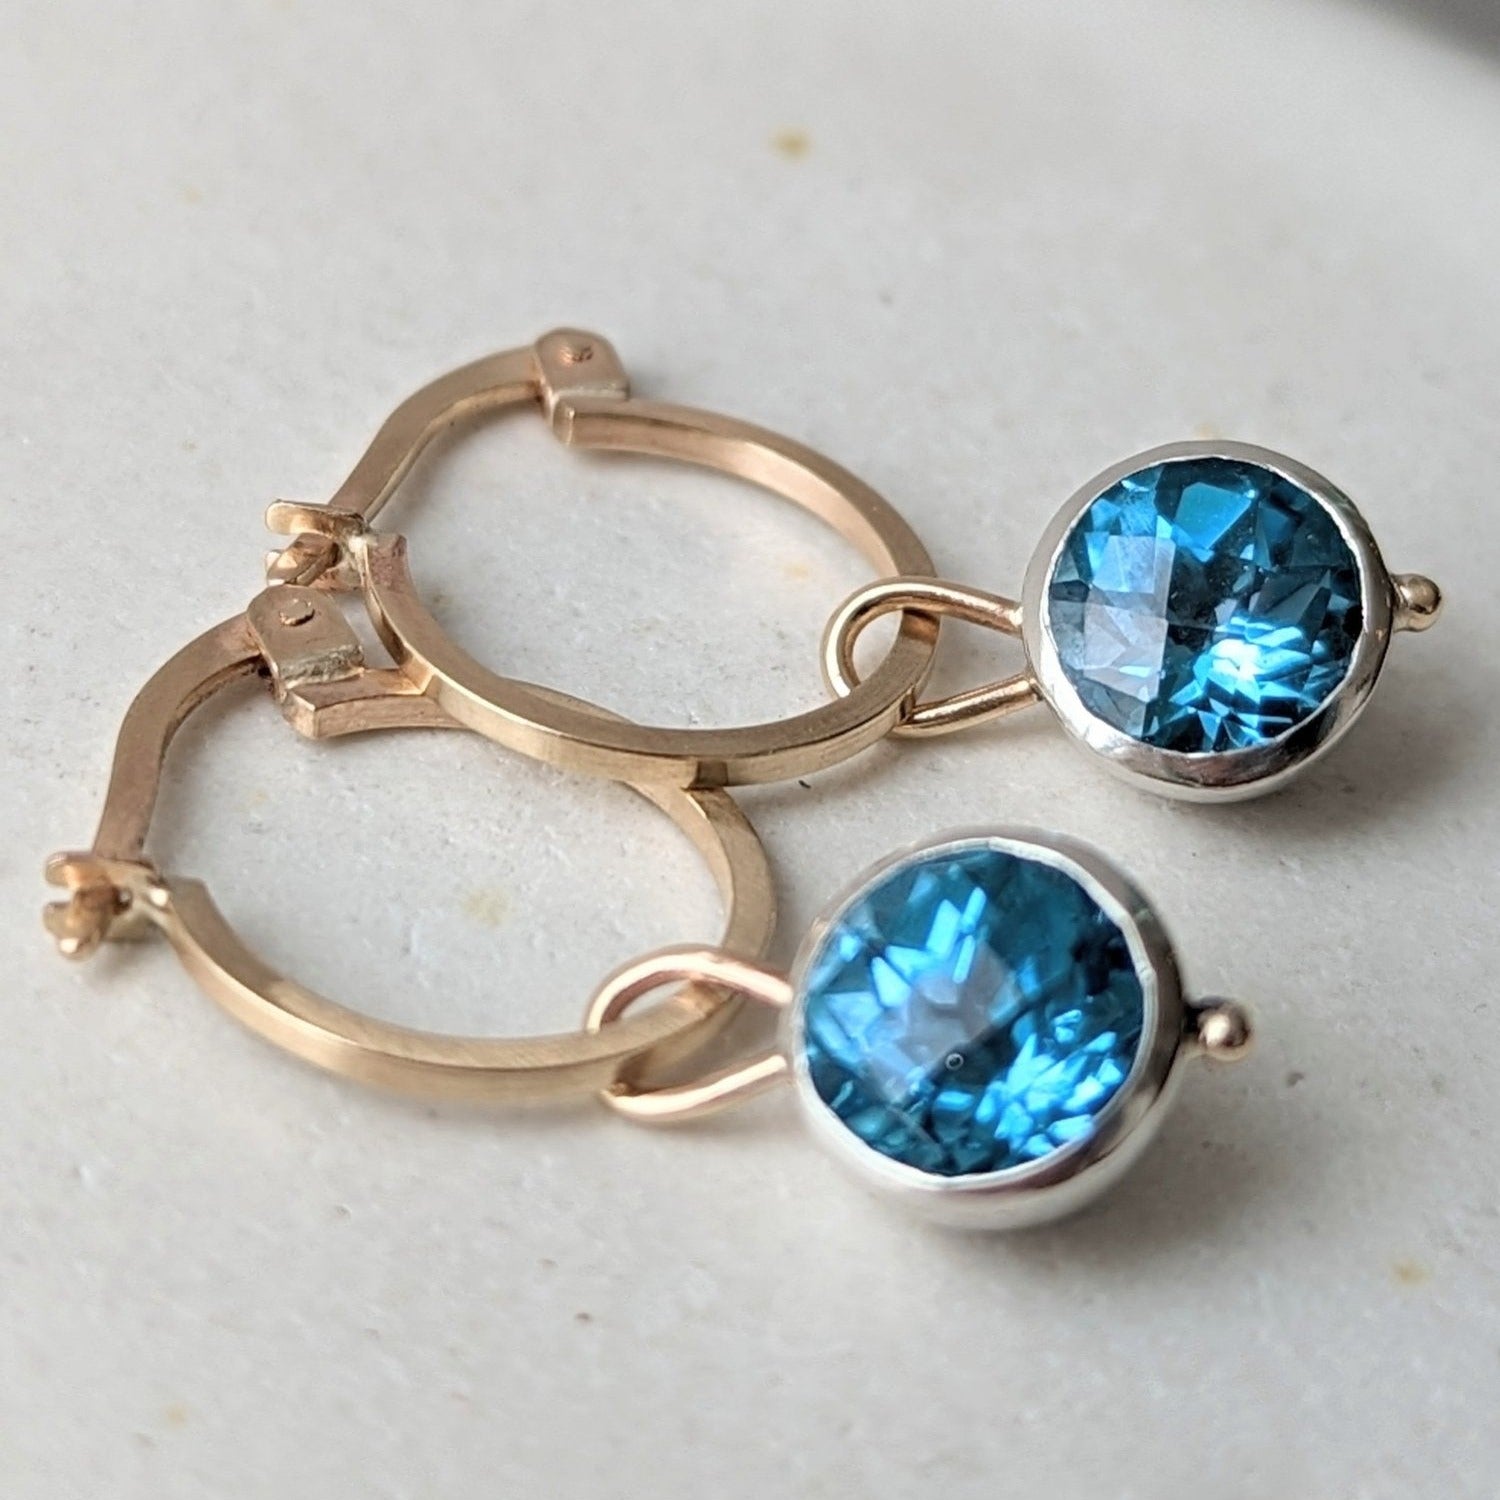 Gold hoop earrings with removable charms with Swiss blue topaz from Ocean Collection by Booblinka Jewellery